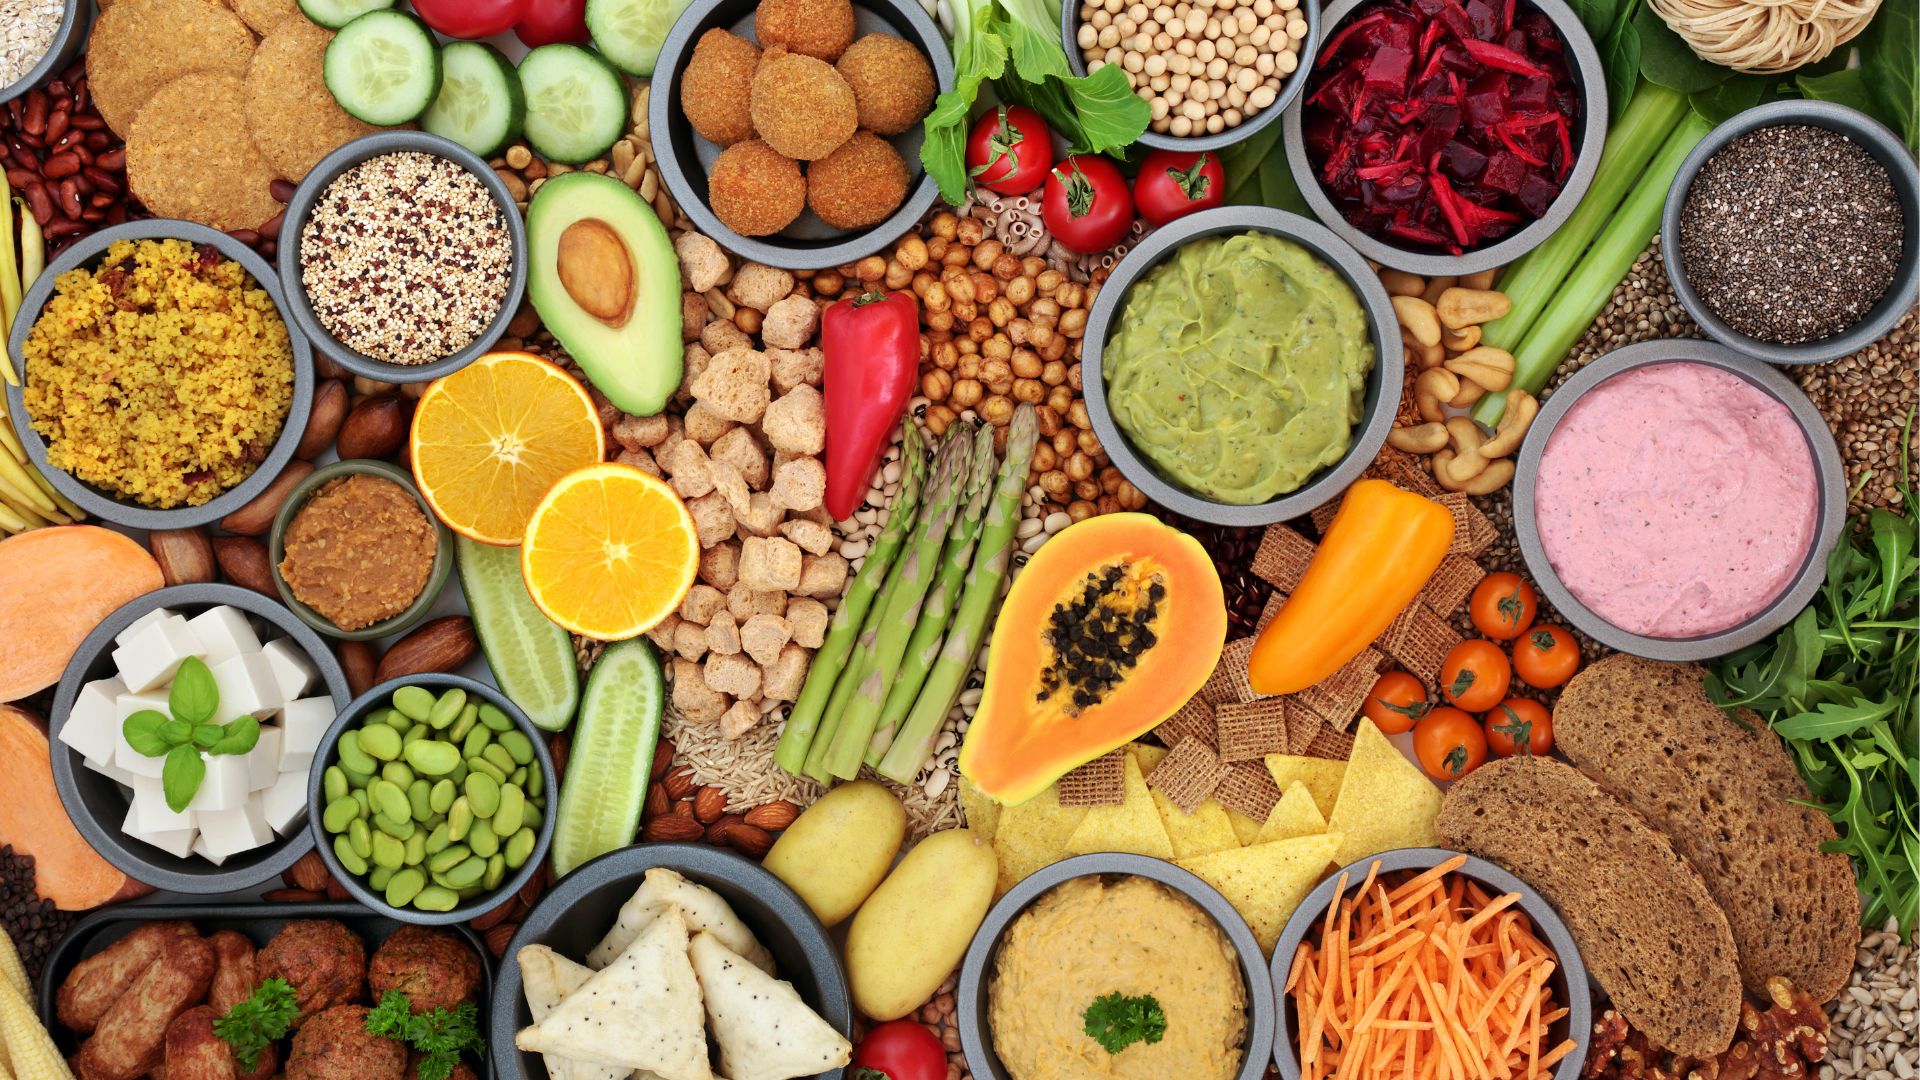 Universities Should Lead on the Plant-Based Dietary Transition